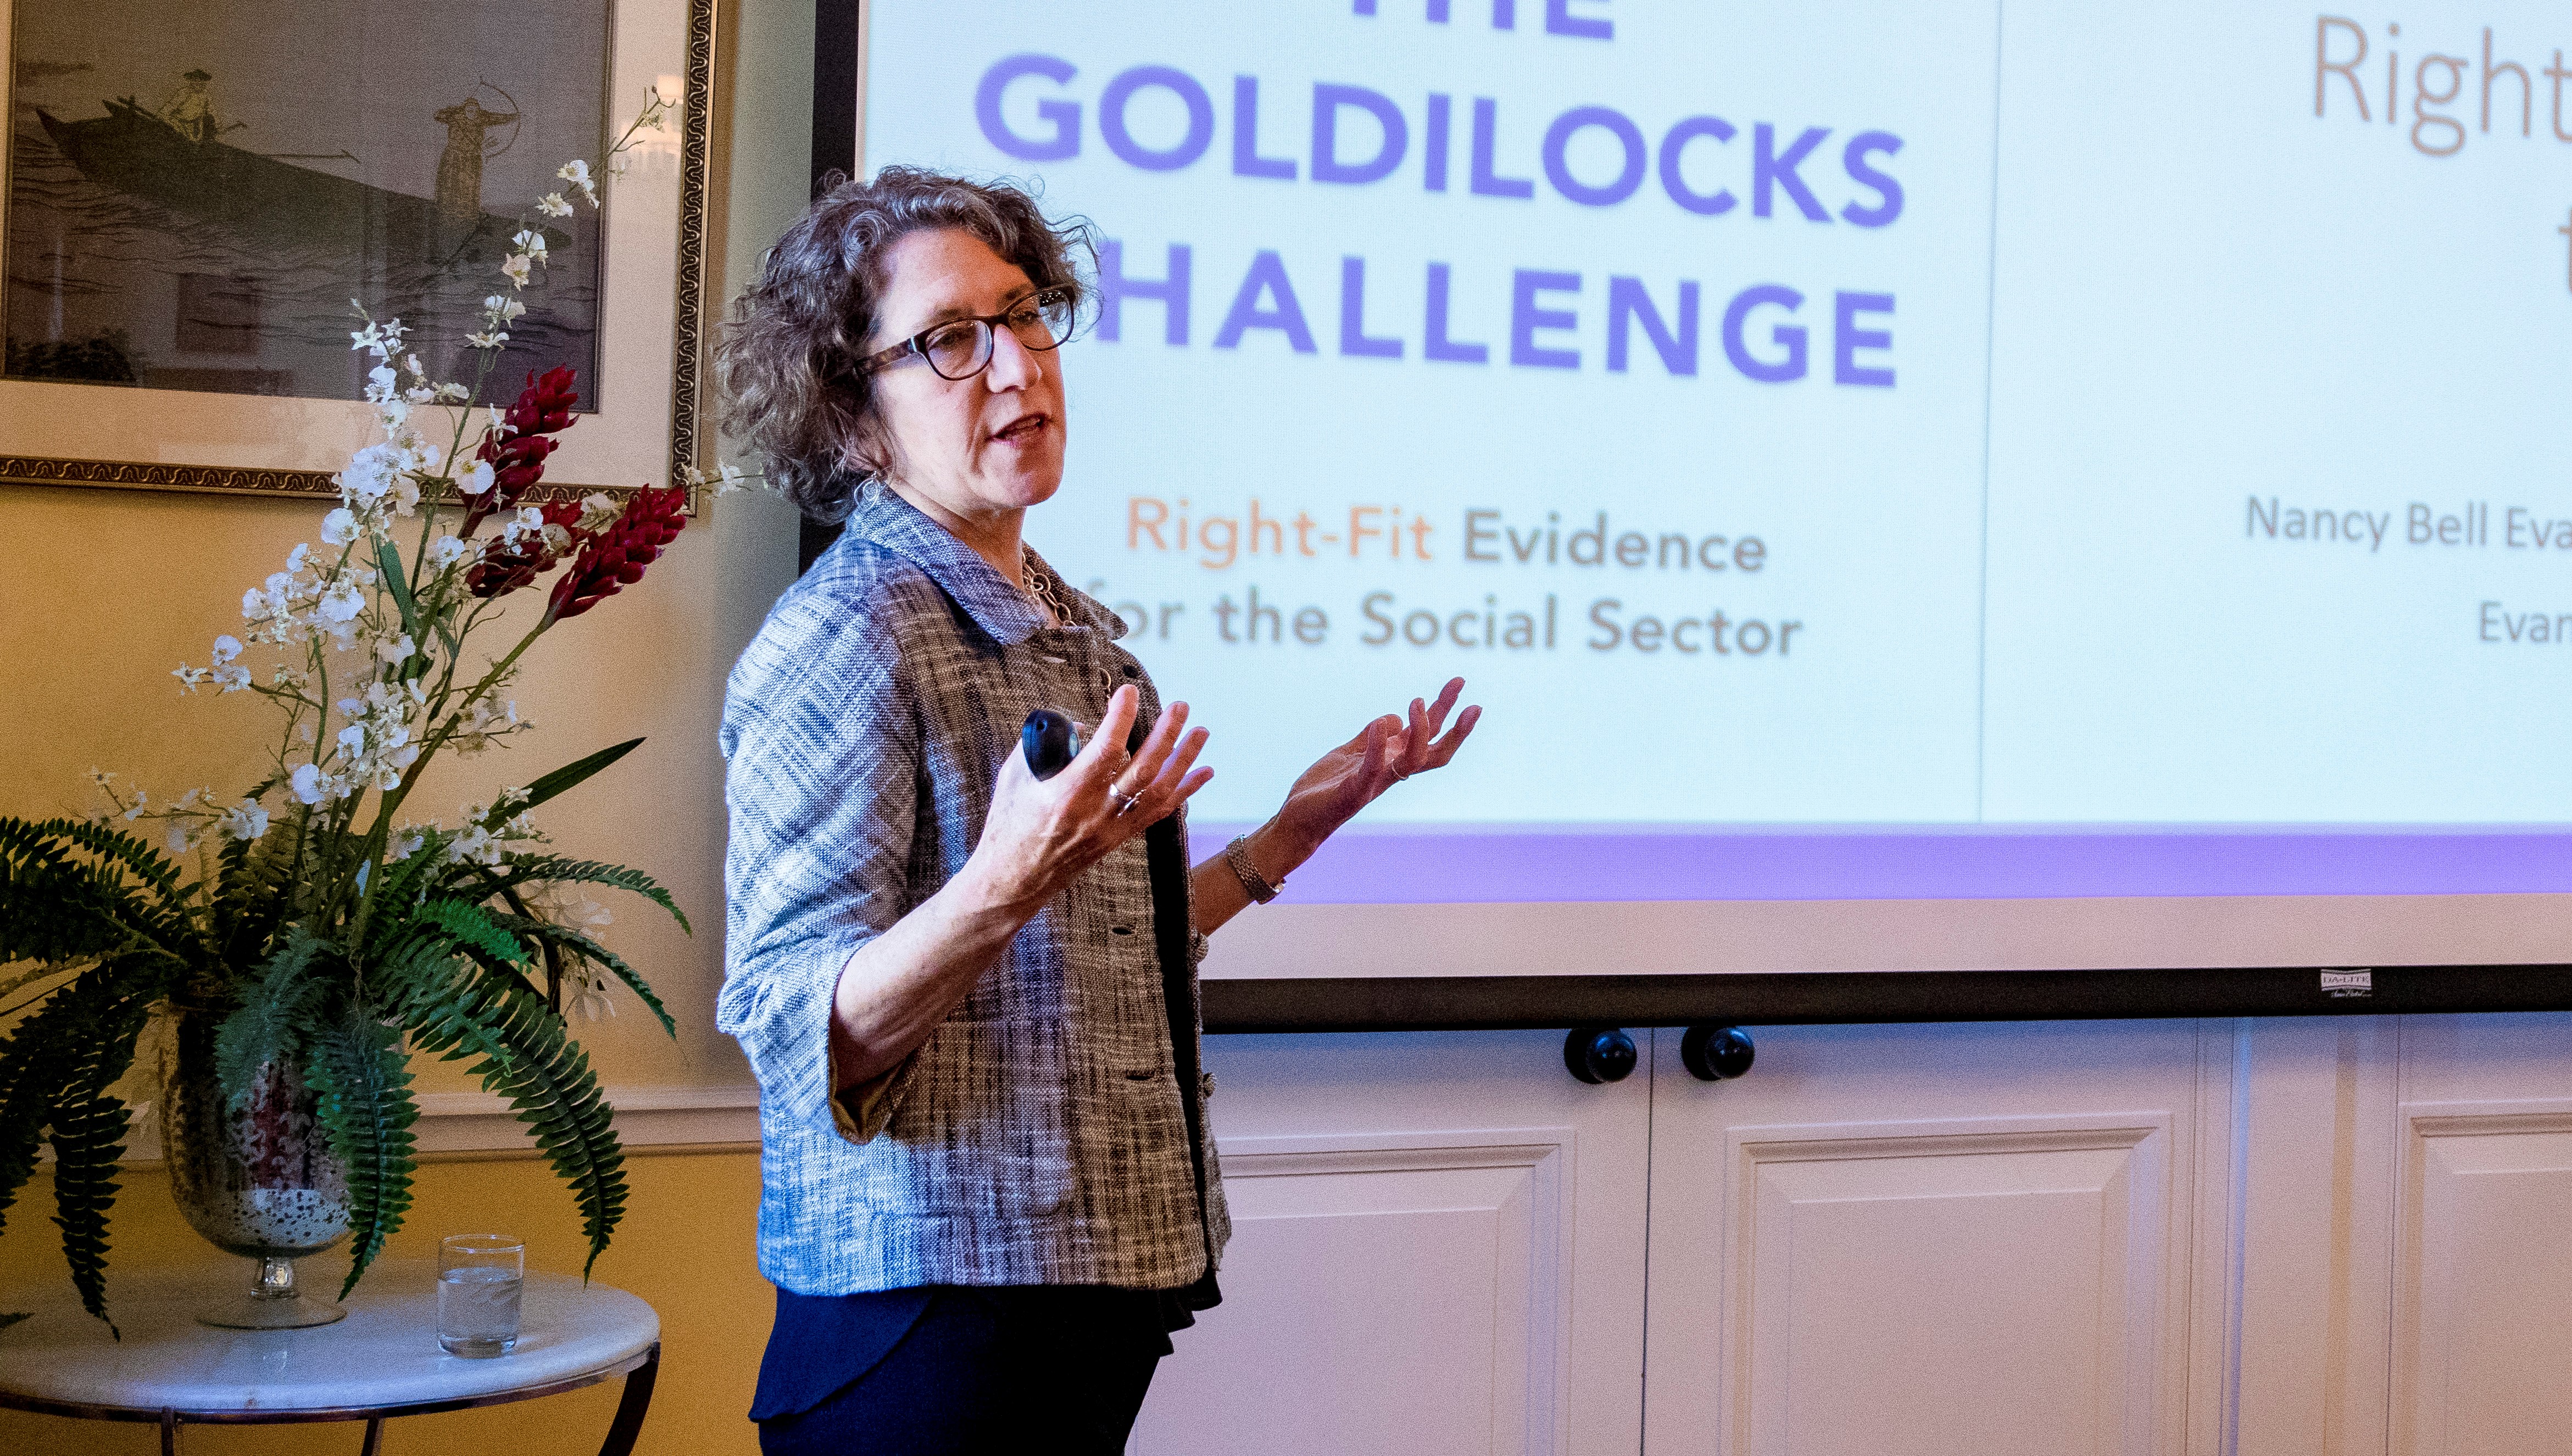 Mary Kay Gugerty Discusses “Right Fit” Evidence for the Social Sector